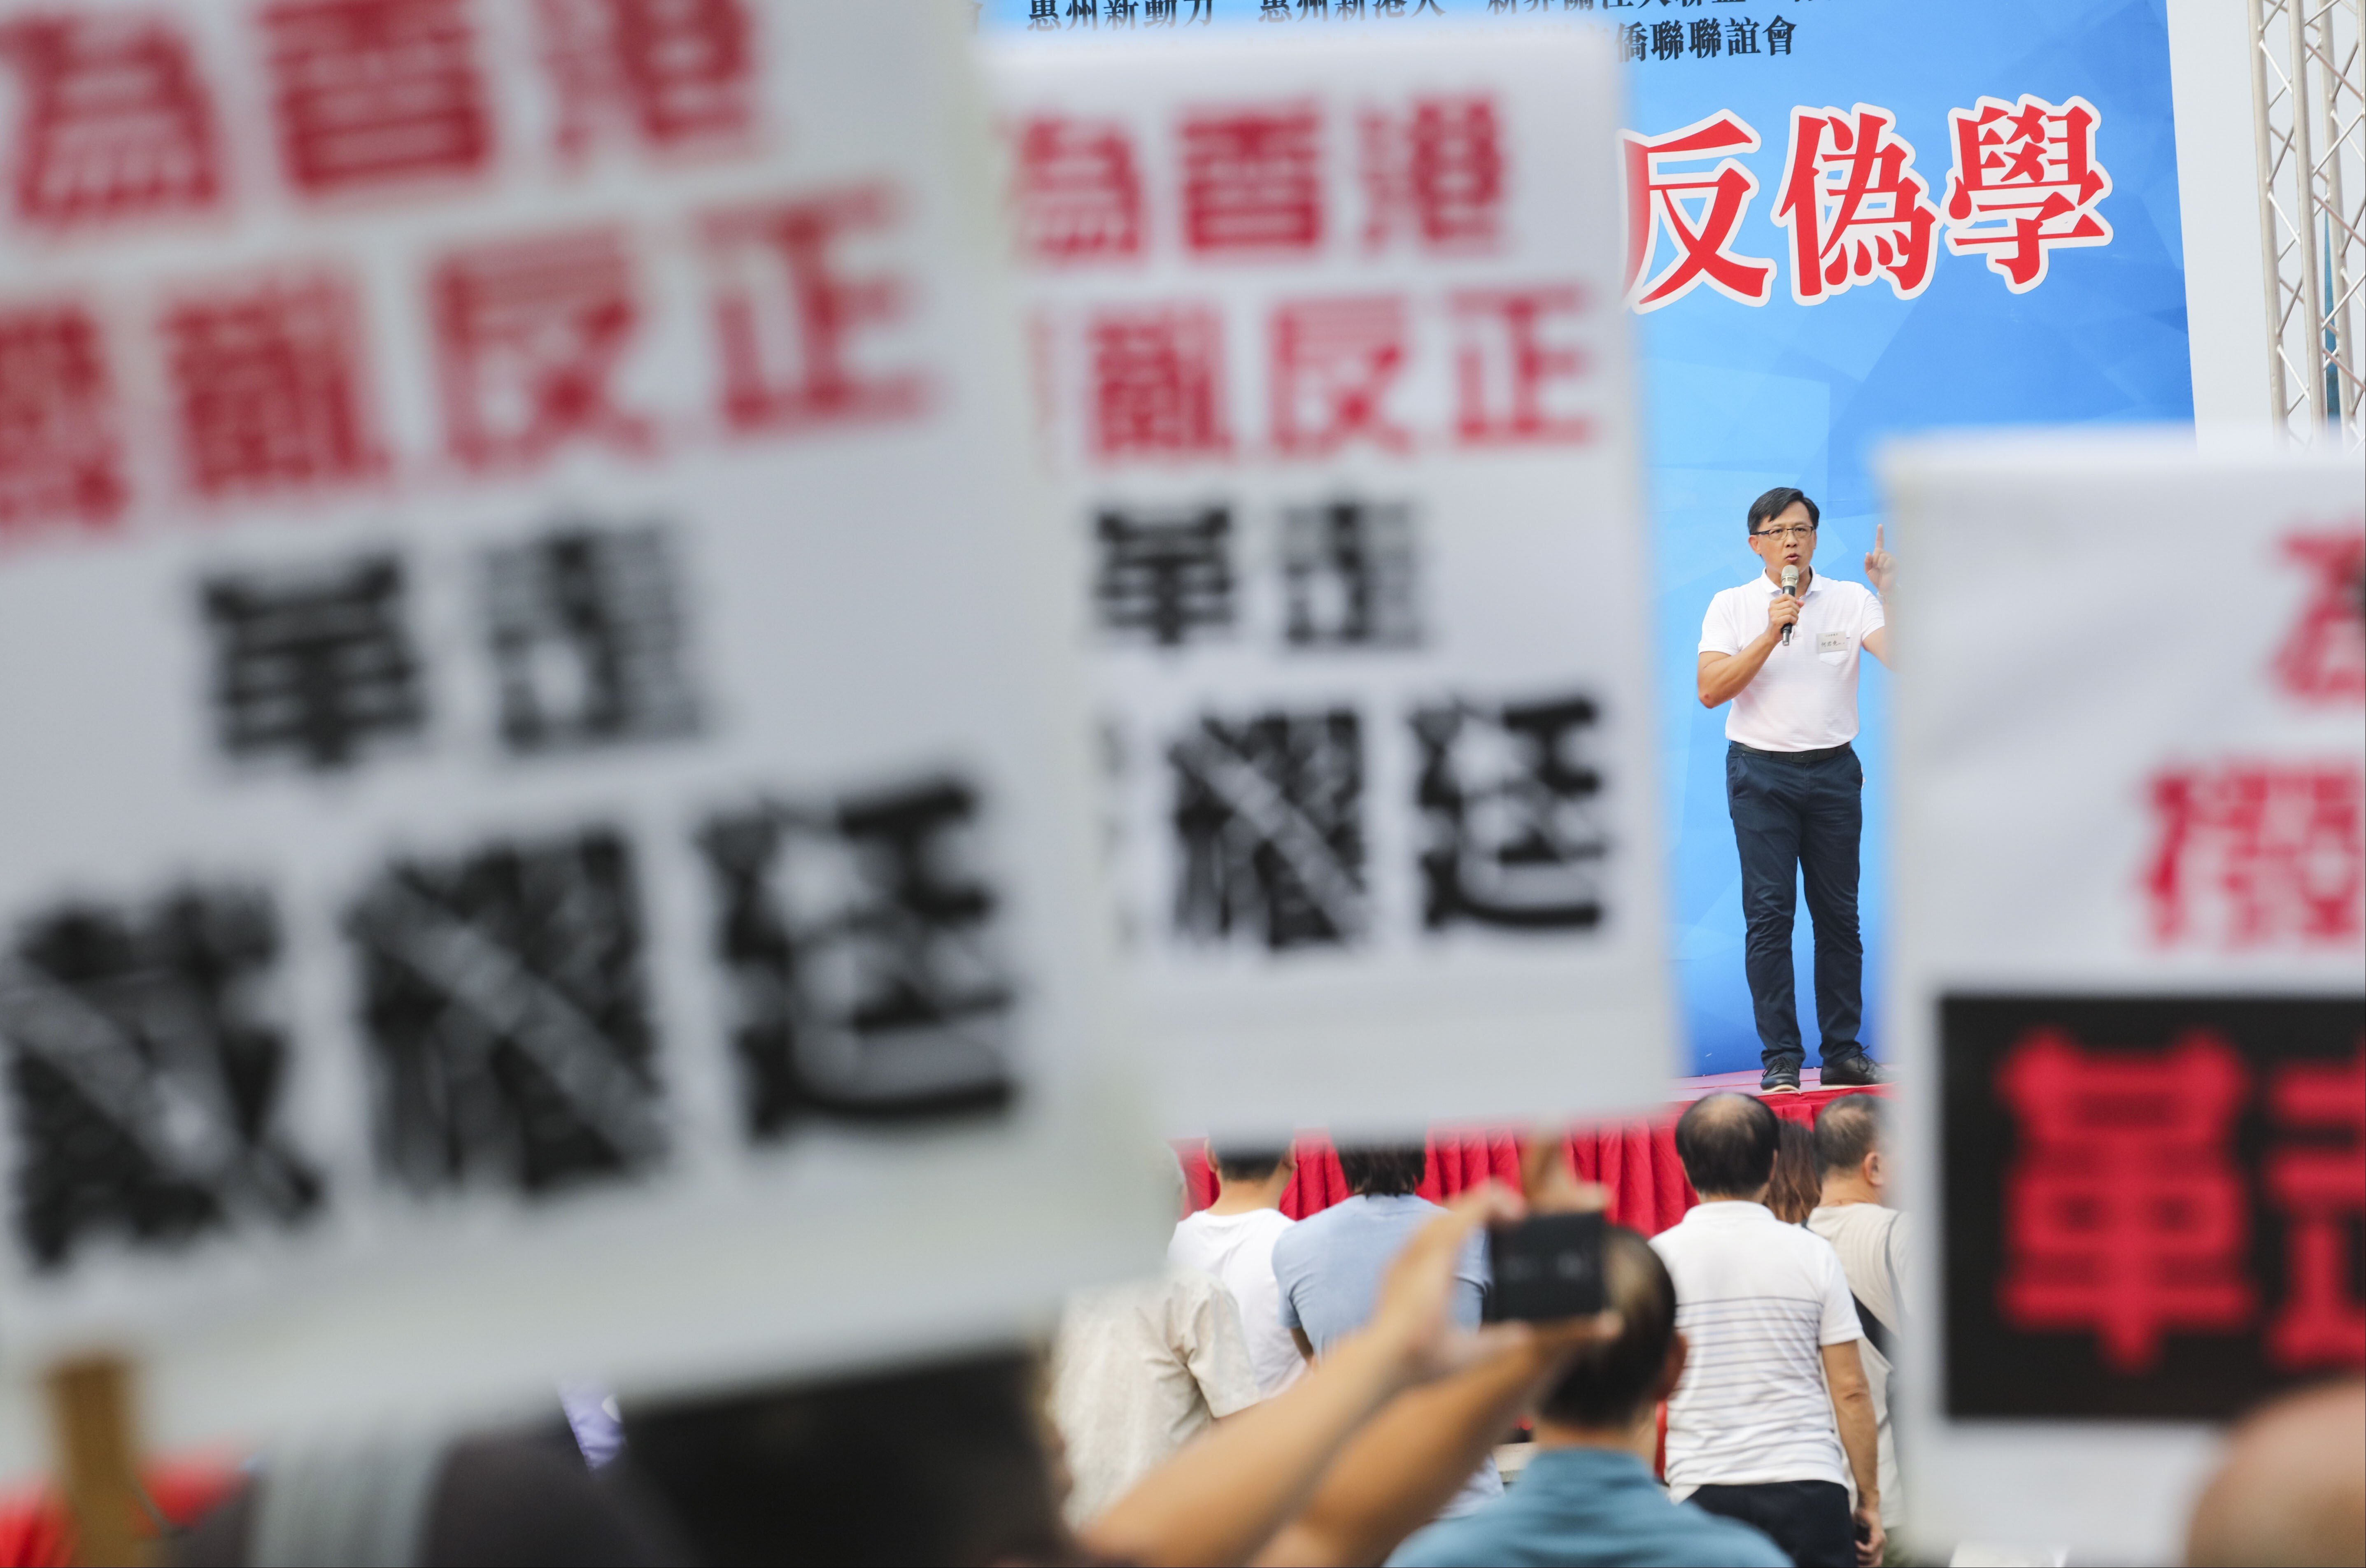 Lawmaker Junius Ho speaks at a rally against Occupy movement figure Benny Tai in 2017. Photo: Felix Wong